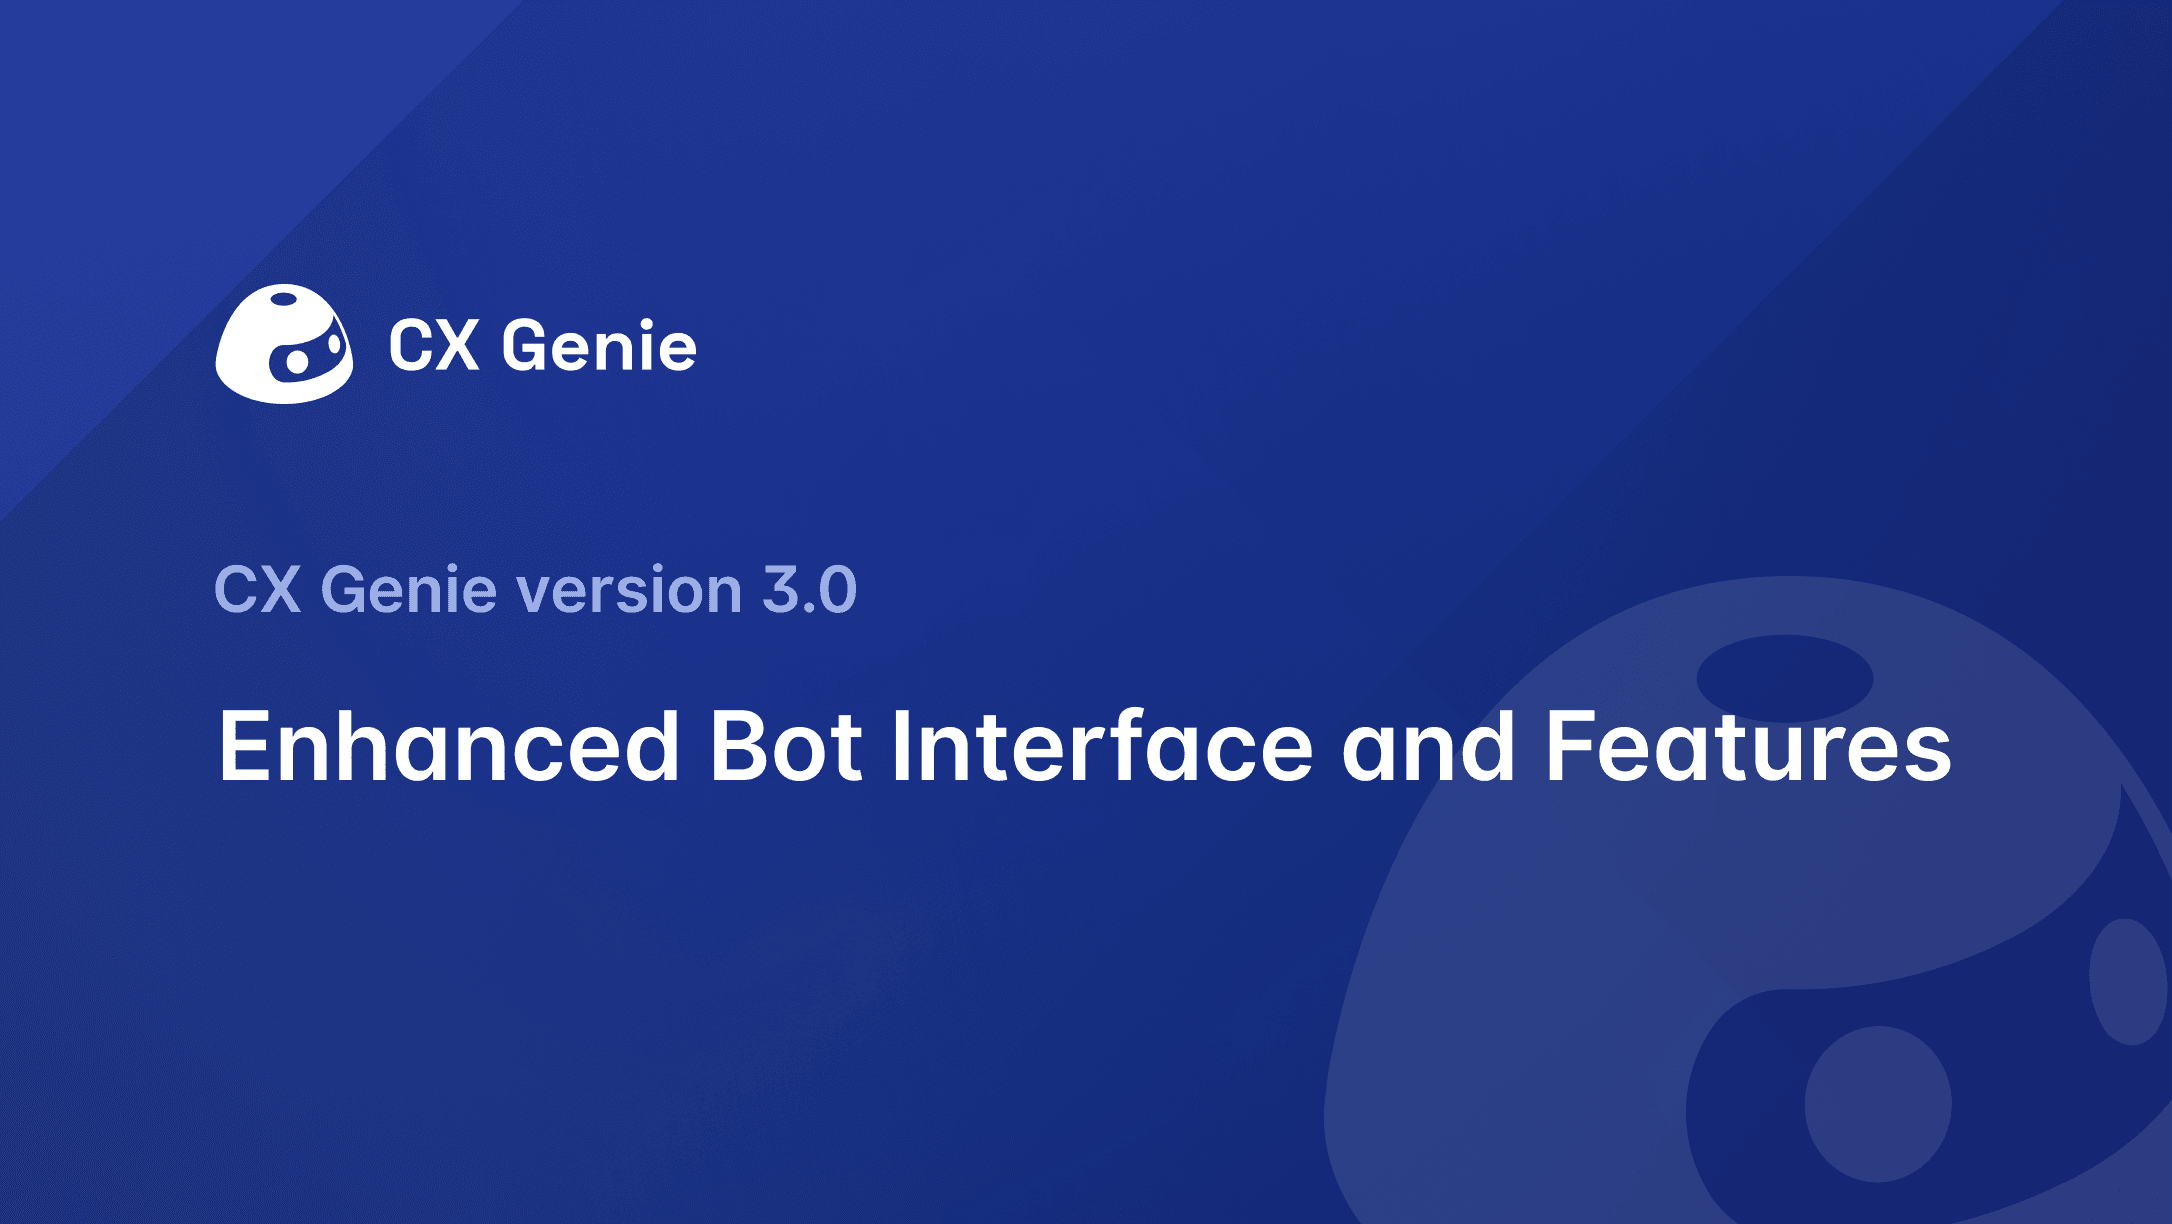 CX Genie Version 3.0: Enhanced Bot Interface and Features